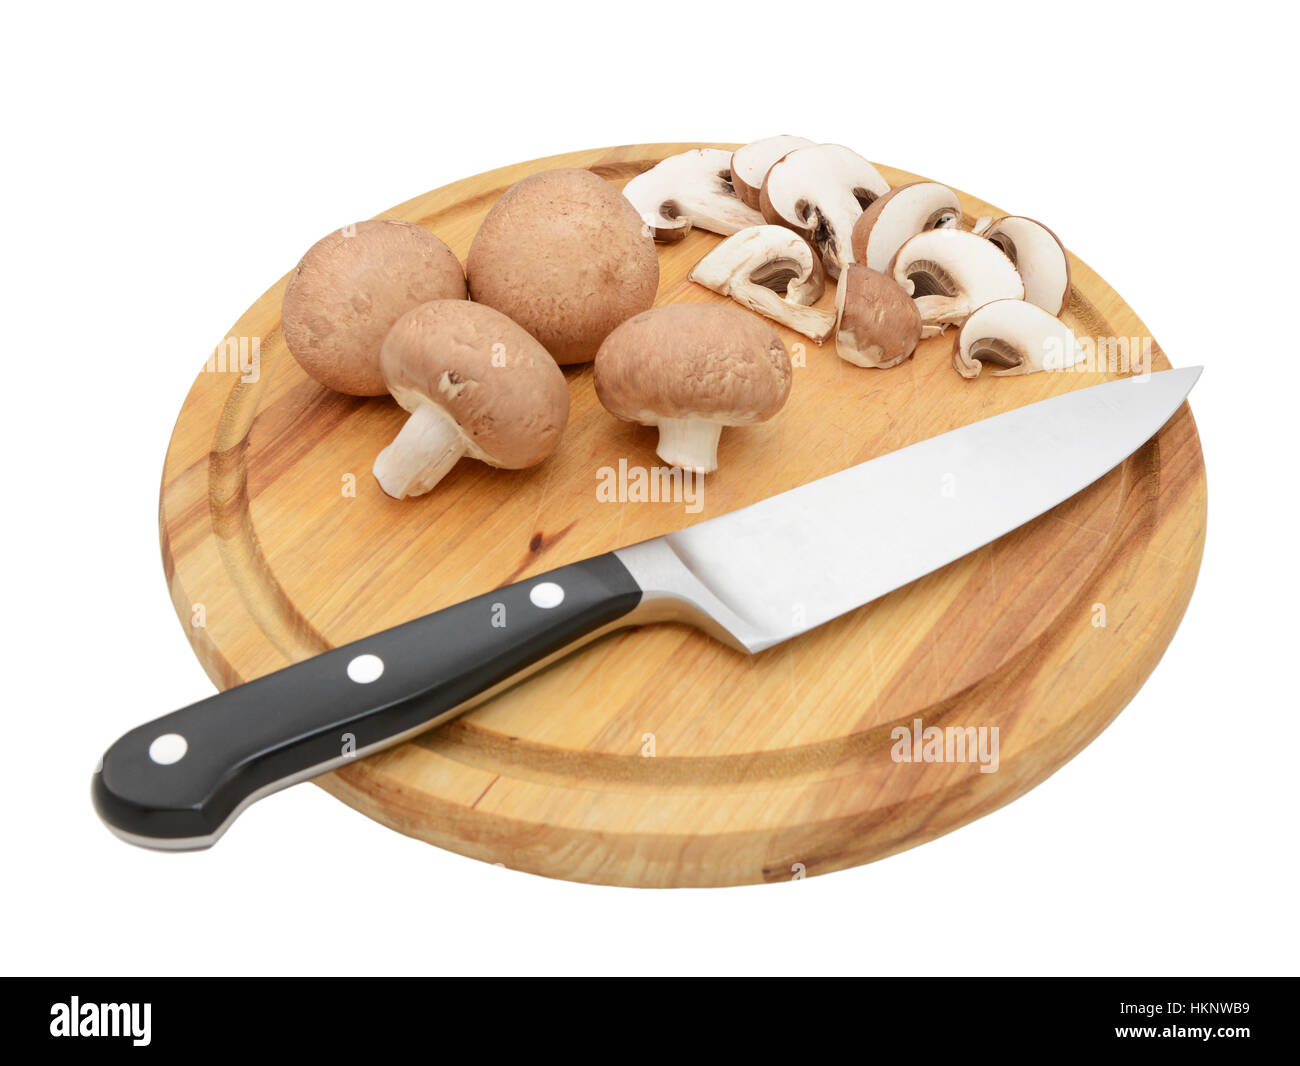 Sharp knife with whole chestnut mushrooms and slices on a circular wooden chopping board, isolated on a white background Stock Photo